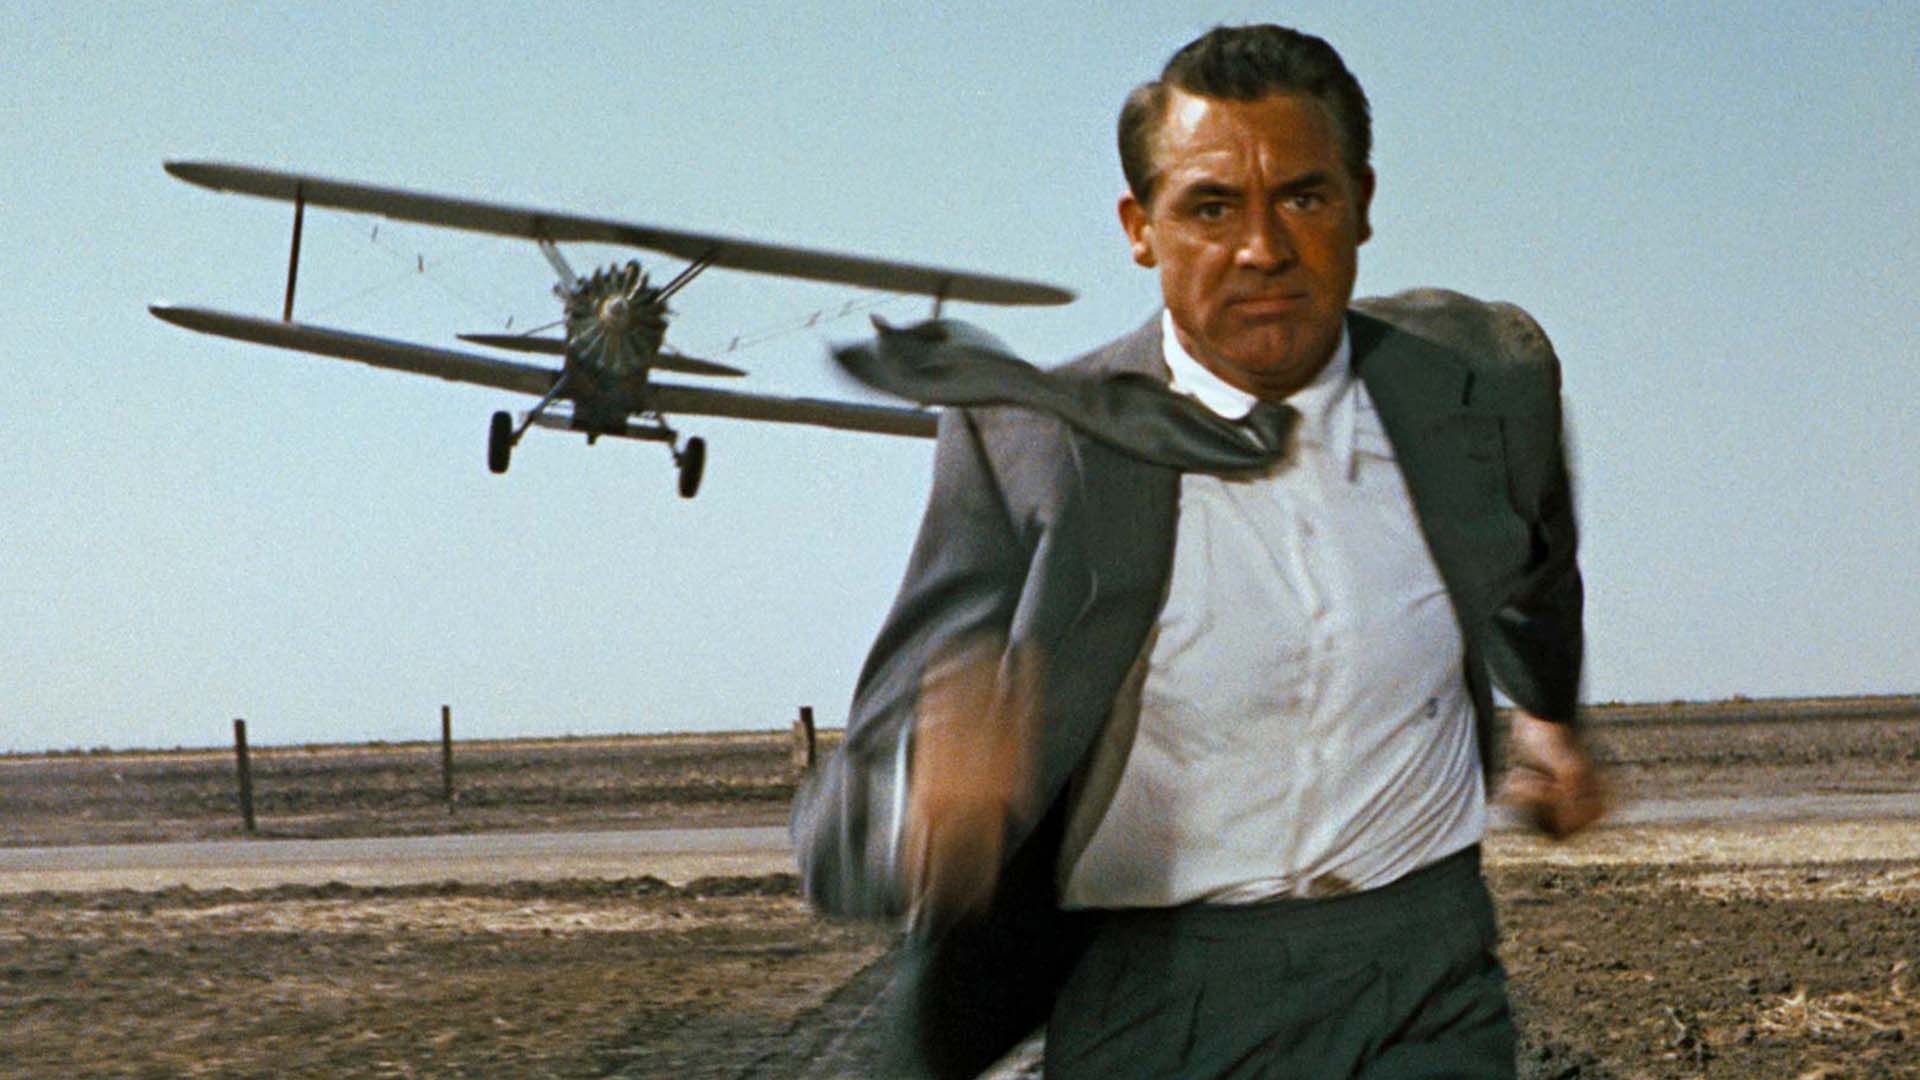 Carrie Grant running away from the plane in North by Northwest